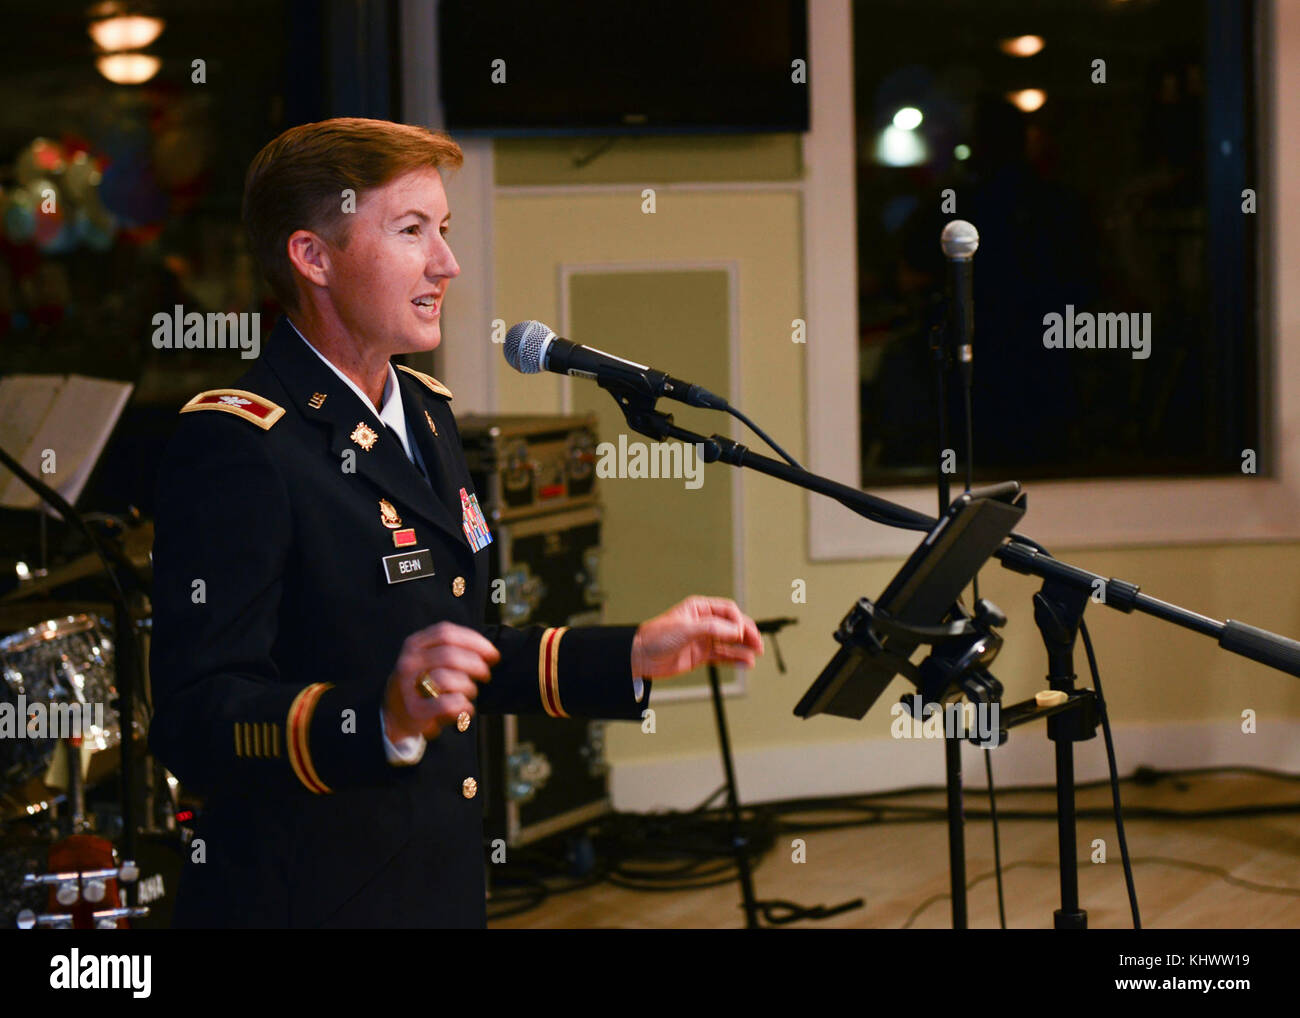 U.S. Army. Col. Beth A. Behn, 7th Transportation Brigade (Expeditionary) commander, gives opening remarks during the seventh annual “Thanks for Giving” holiday social for Gold Star families at Joint Base Langley-Eustis, Va., Nov. 16, 2017.  At this year’s event, families connected over music performed by the U.S. Army Training and Doctrine Command brass band, a meal served by community organizations and a talent showcase. (U.S. Air Force photo by Tech. Sgt. Katie Gar Ward) Stock Photo